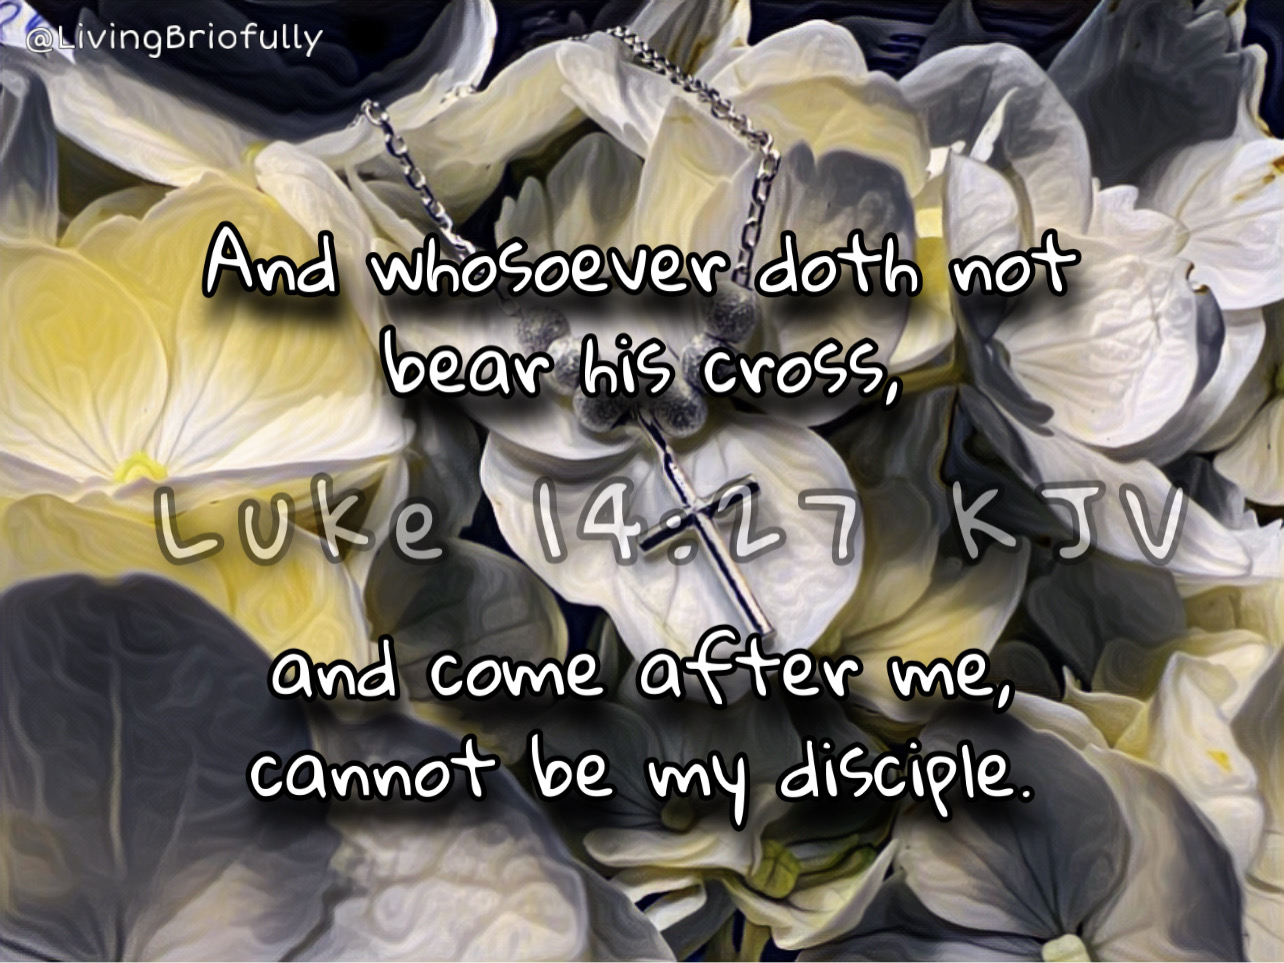 "And whosoever doth not bear his cross, and come after me, cannot be my disciple." Luke 14:27 KJV